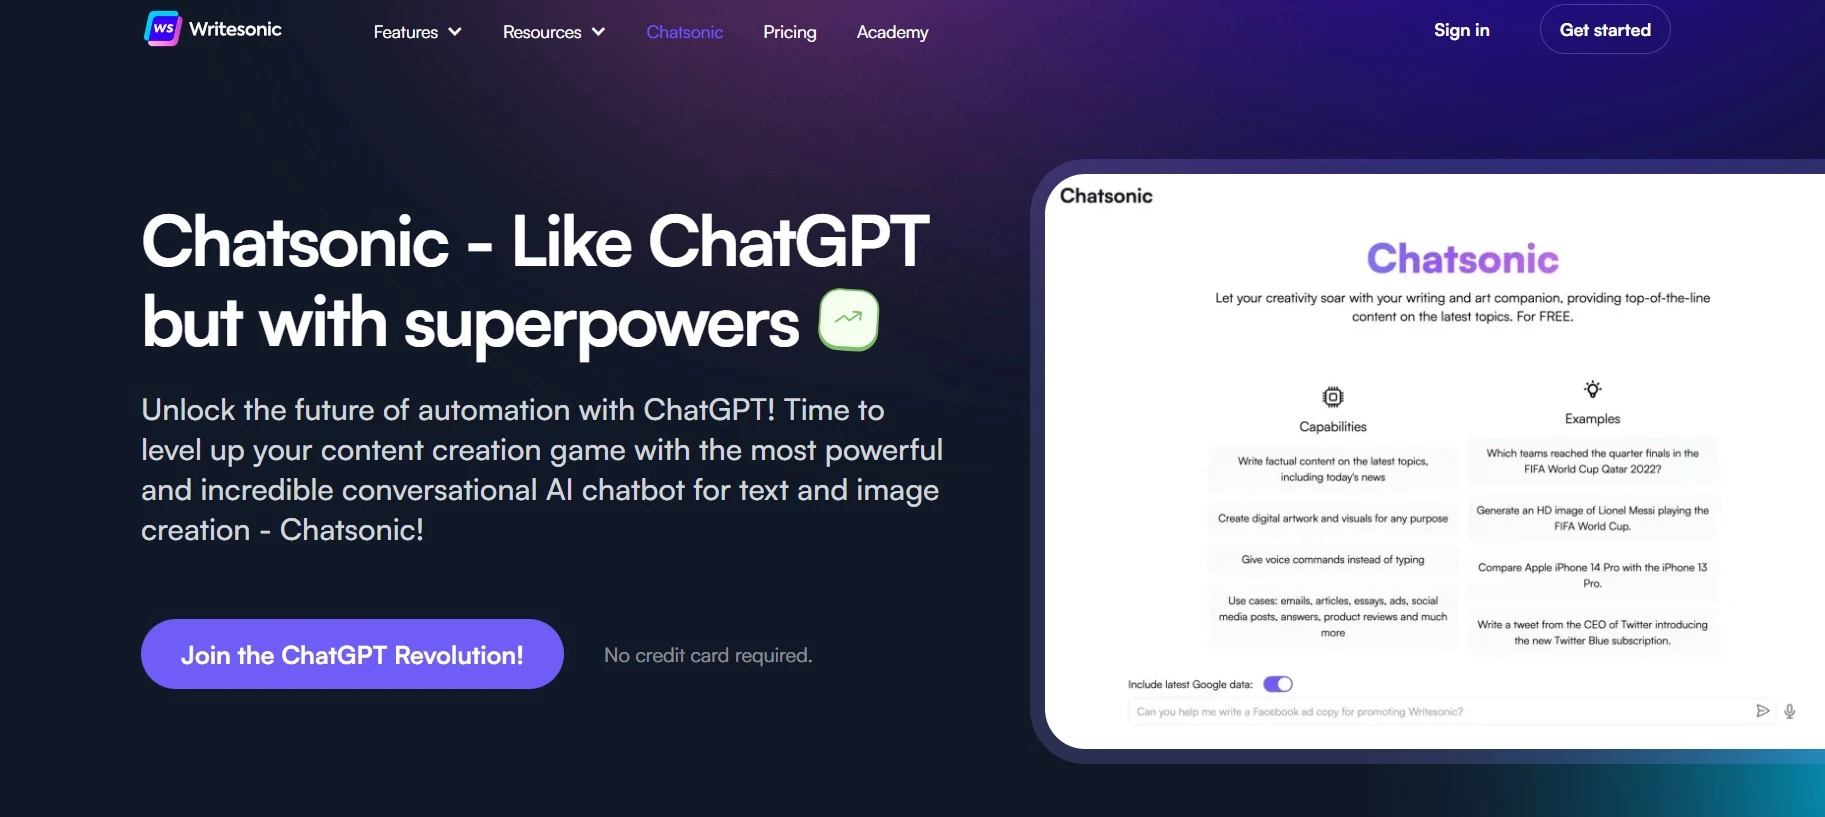 Chatsonic like chatgtp with superpowers